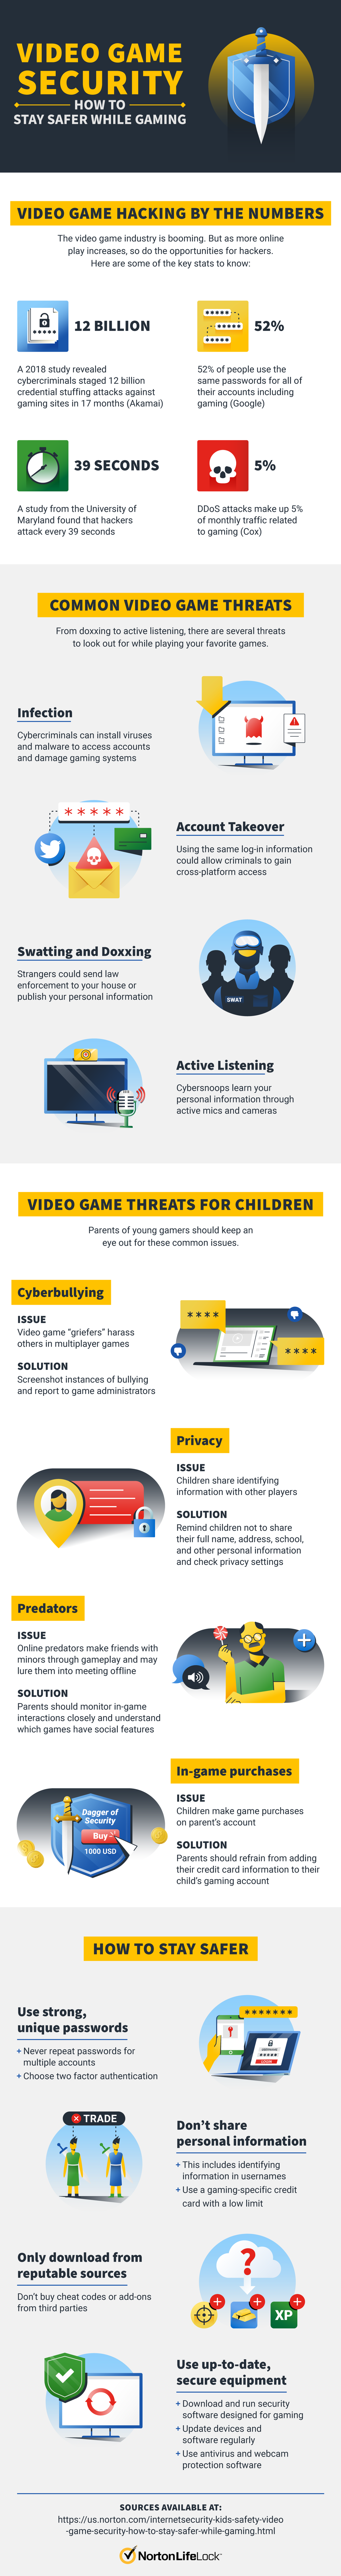 video-game-security-revised